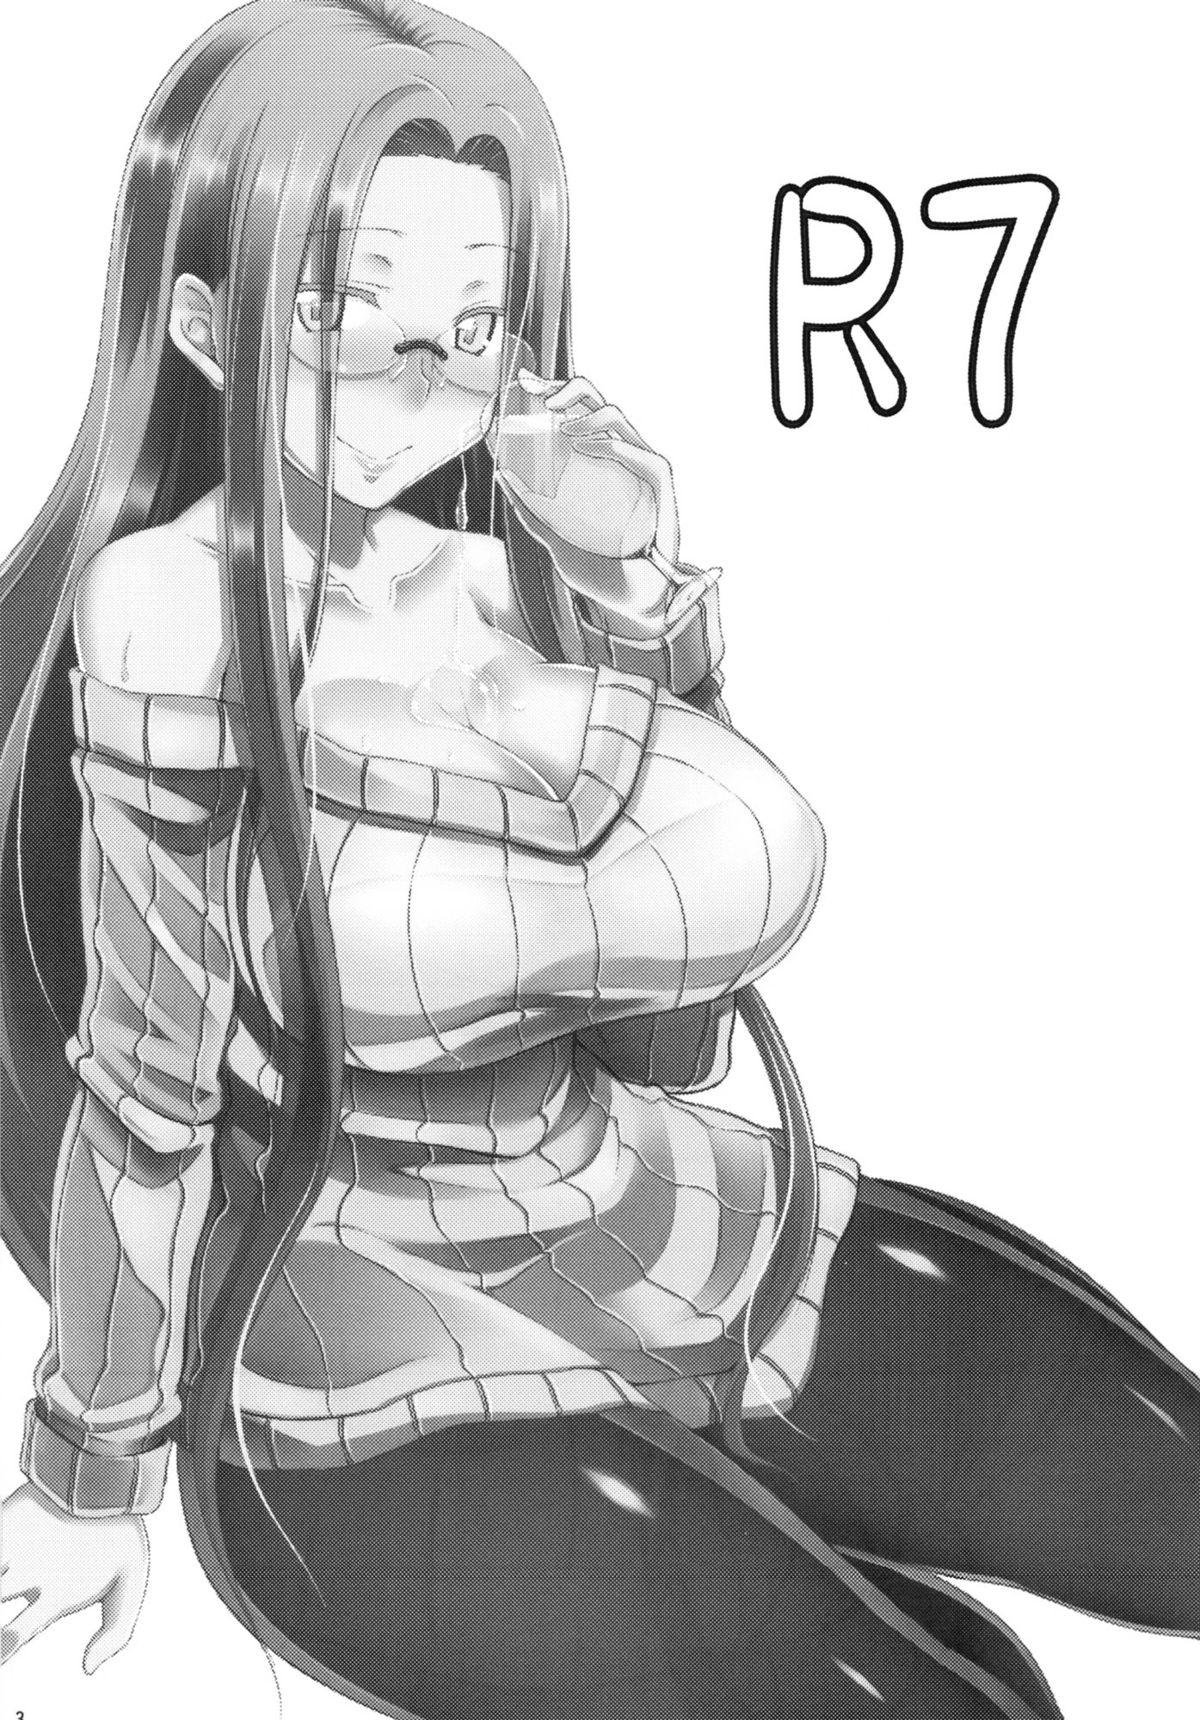 Daring R7 - Fate stay night Fate hollow ataraxia Jerk Off - Page 2